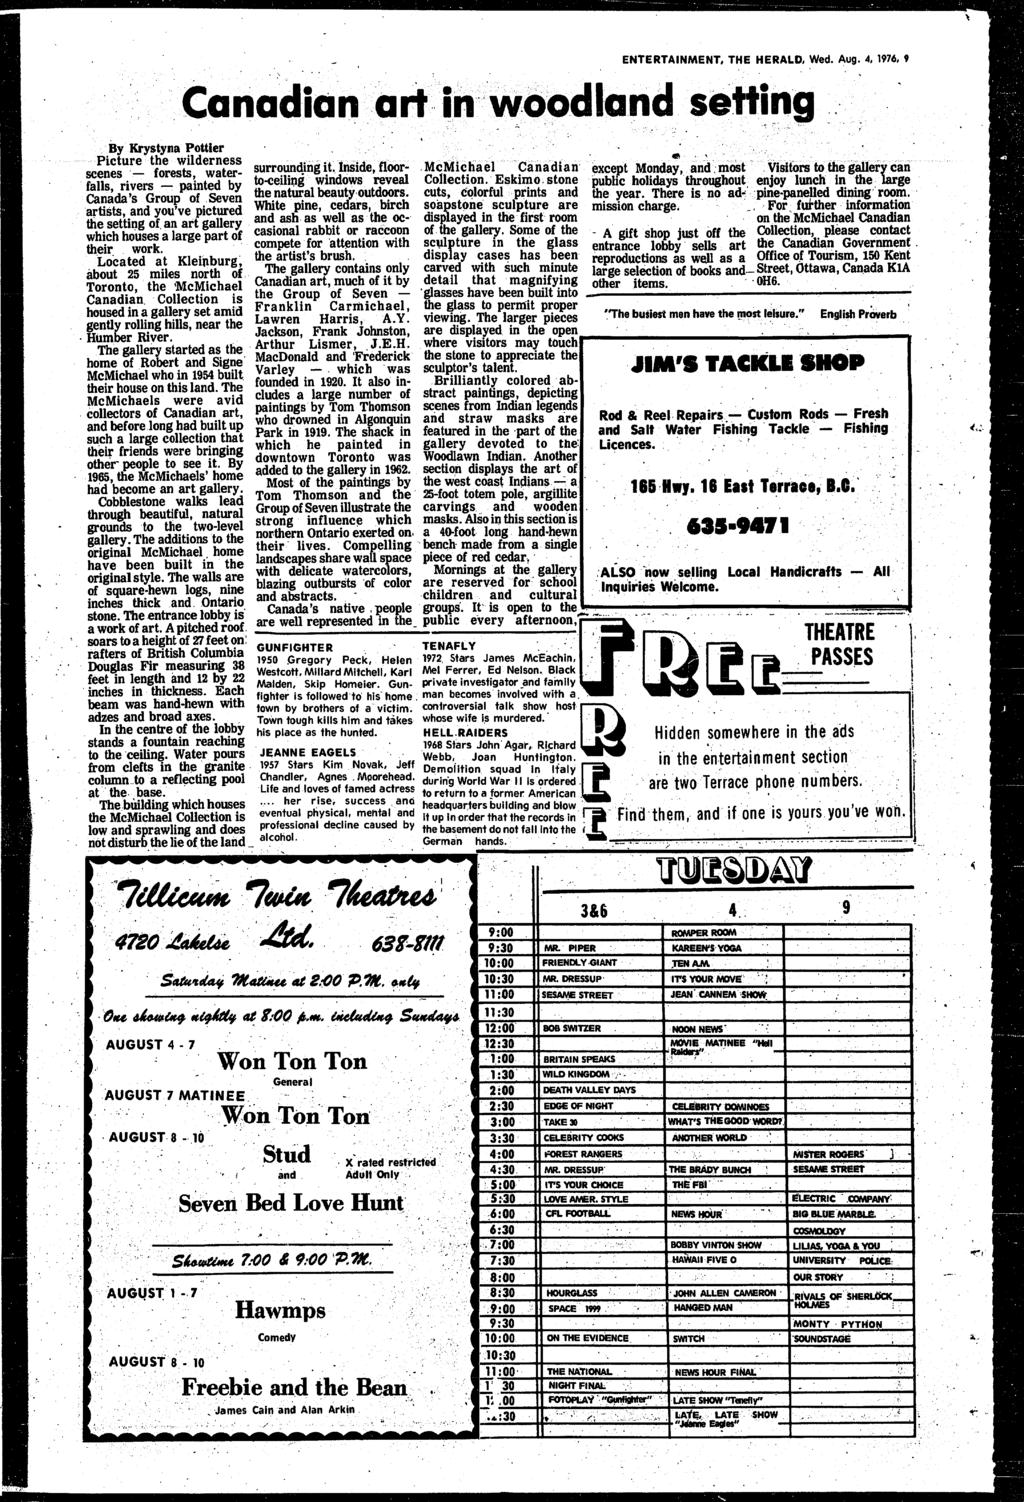 .... ENTERTANMENT, THE HERALD, Wed. Aug. 4, 1976, 9 Cana:dan :art: n woodl:ond settng.by Krystyna Potter Pzcture the wlderness scenes -- forests, waterfalls, rvers -- panted by Canada's Group of.